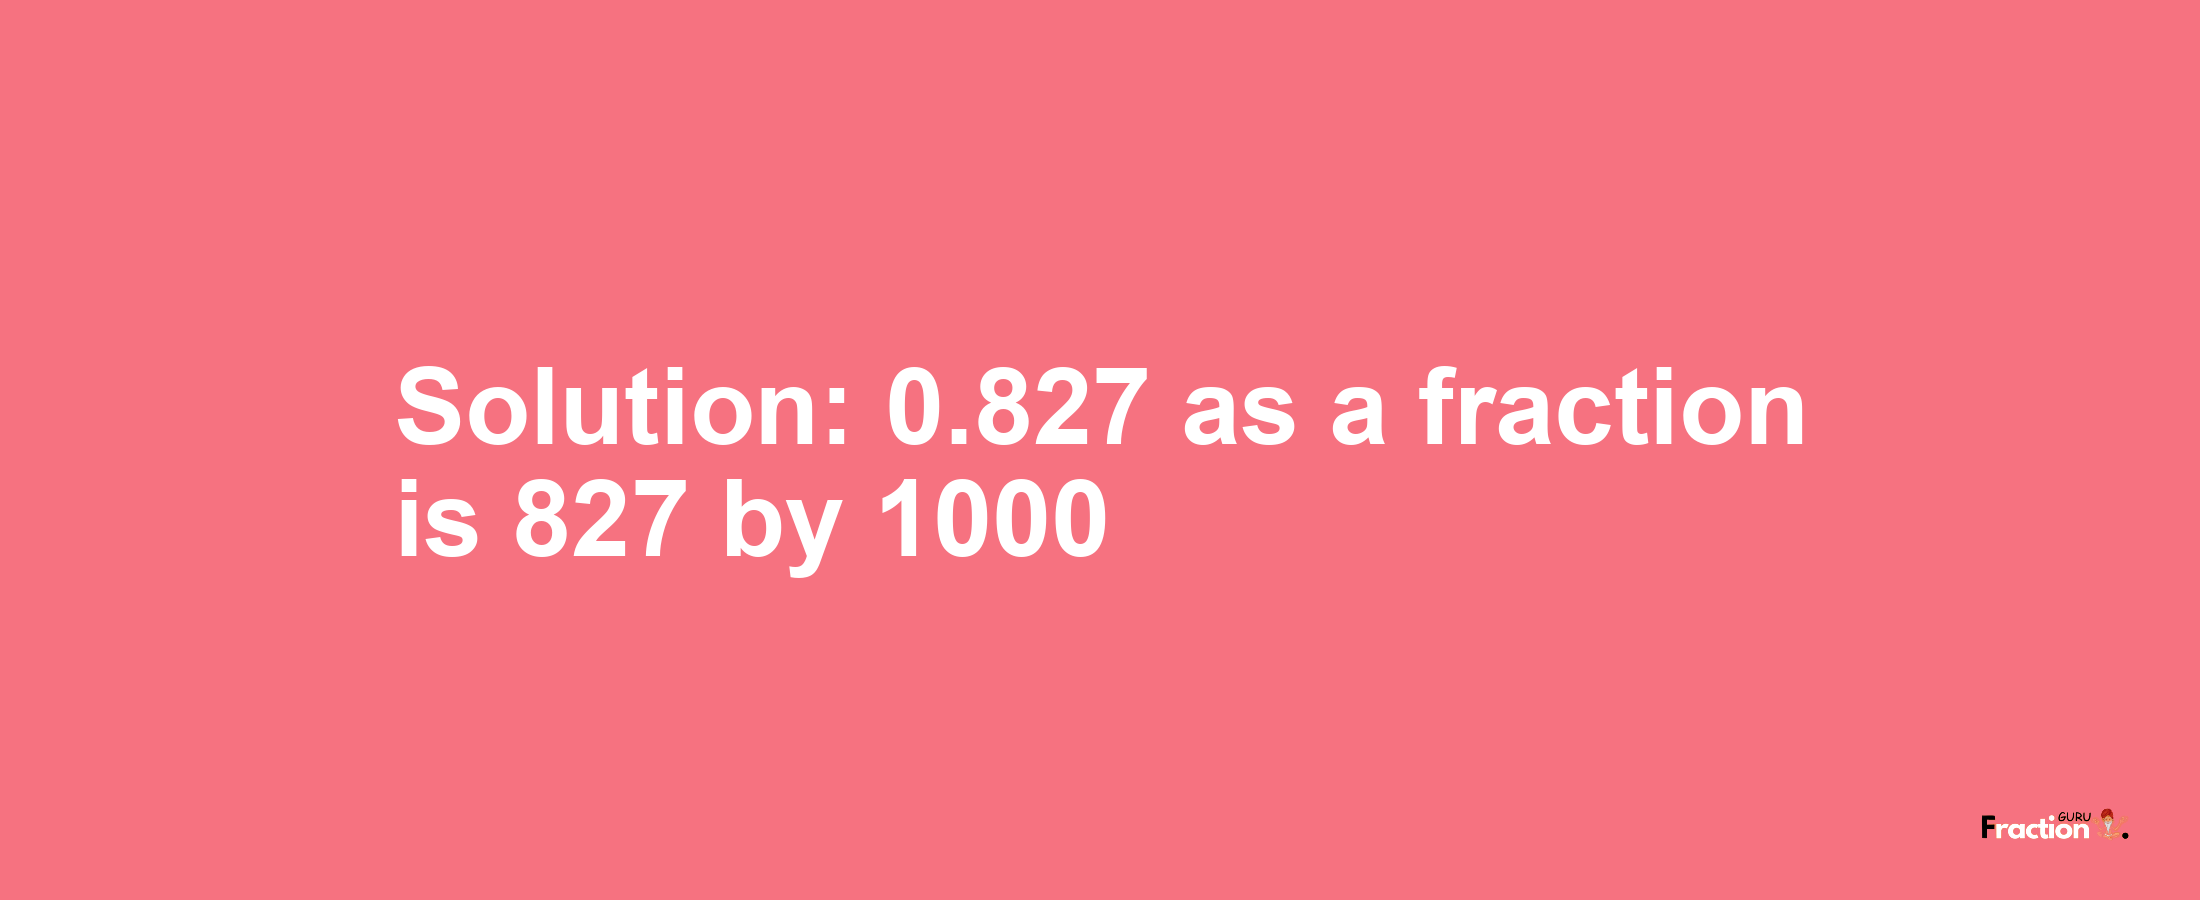 Solution:0.827 as a fraction is 827/1000